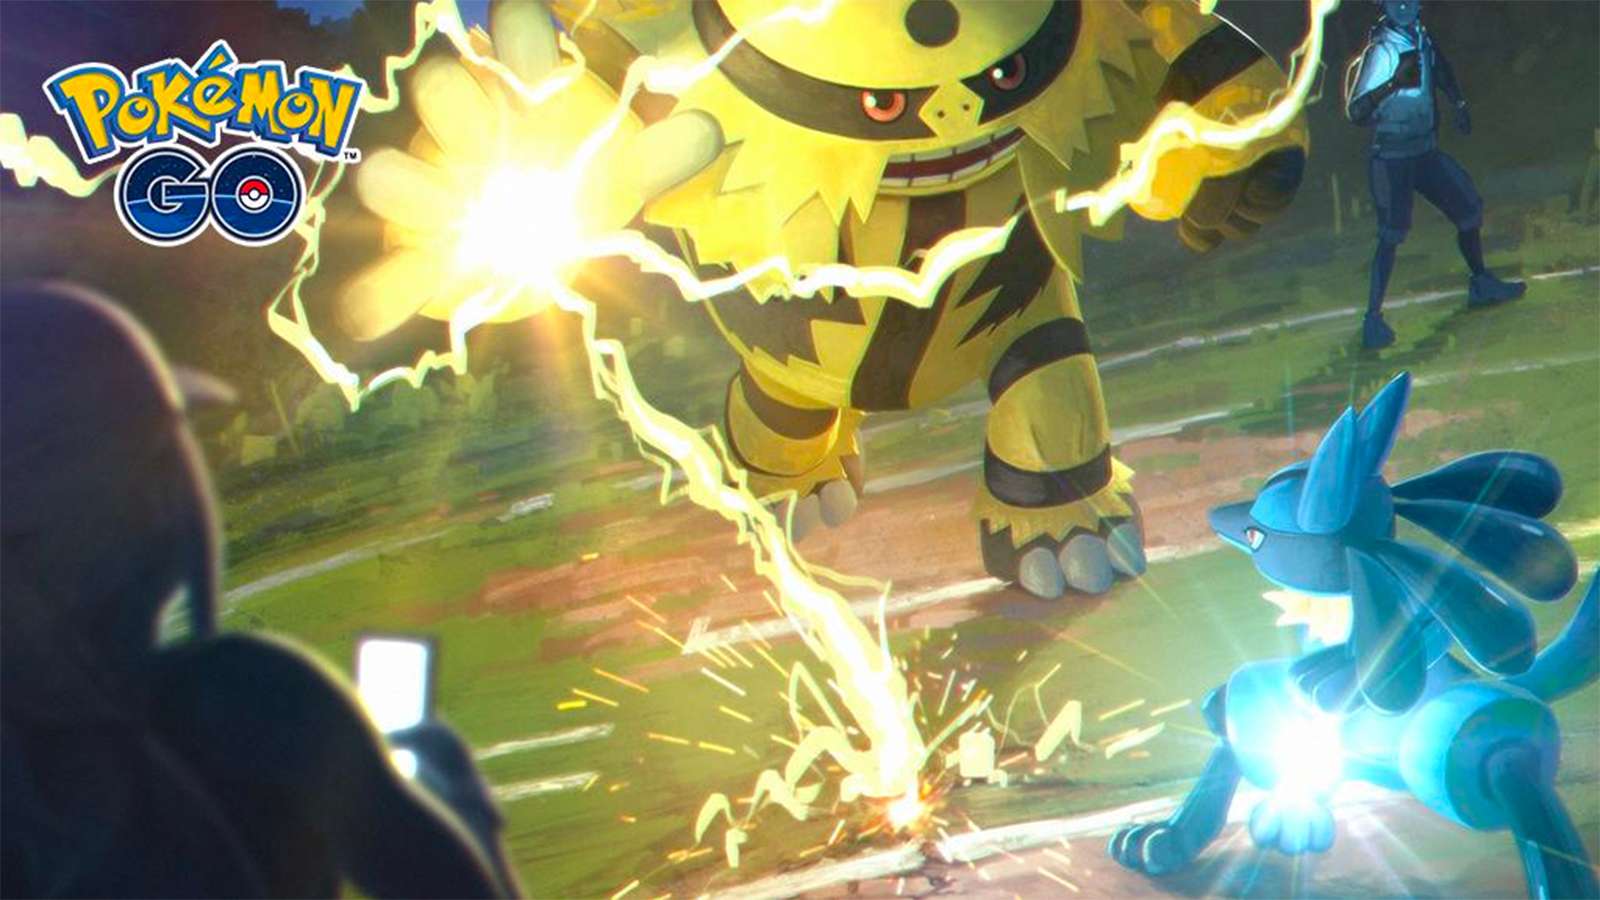 A super effective charged attack in Pokemon GO